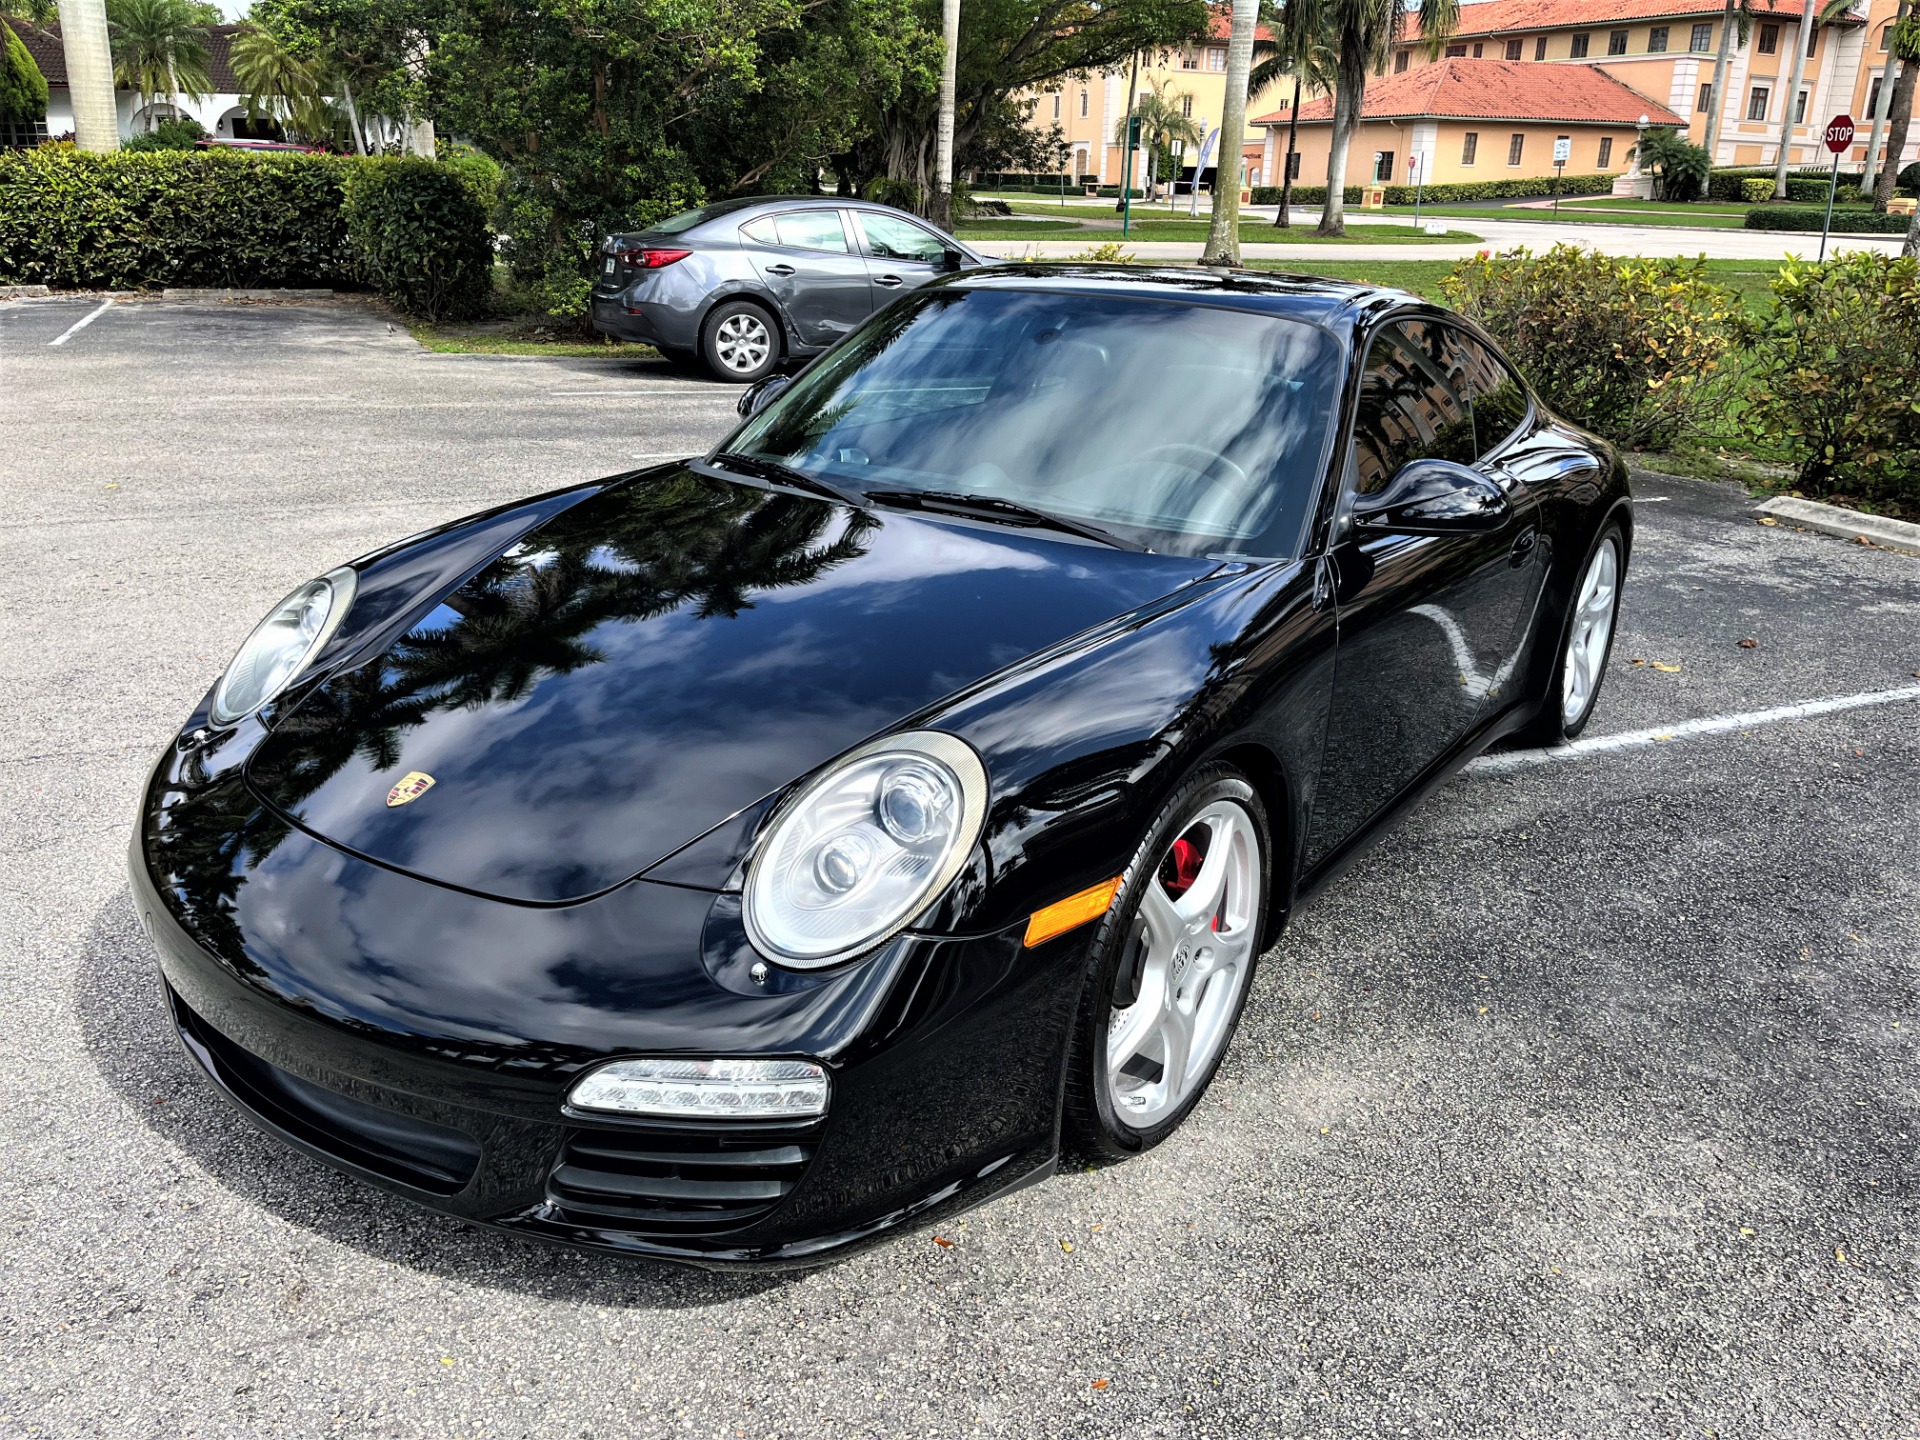 Used 2011 Porsche 911 Carrera S for sale Sold at The Gables Sports Cars in Miami FL 33146 4